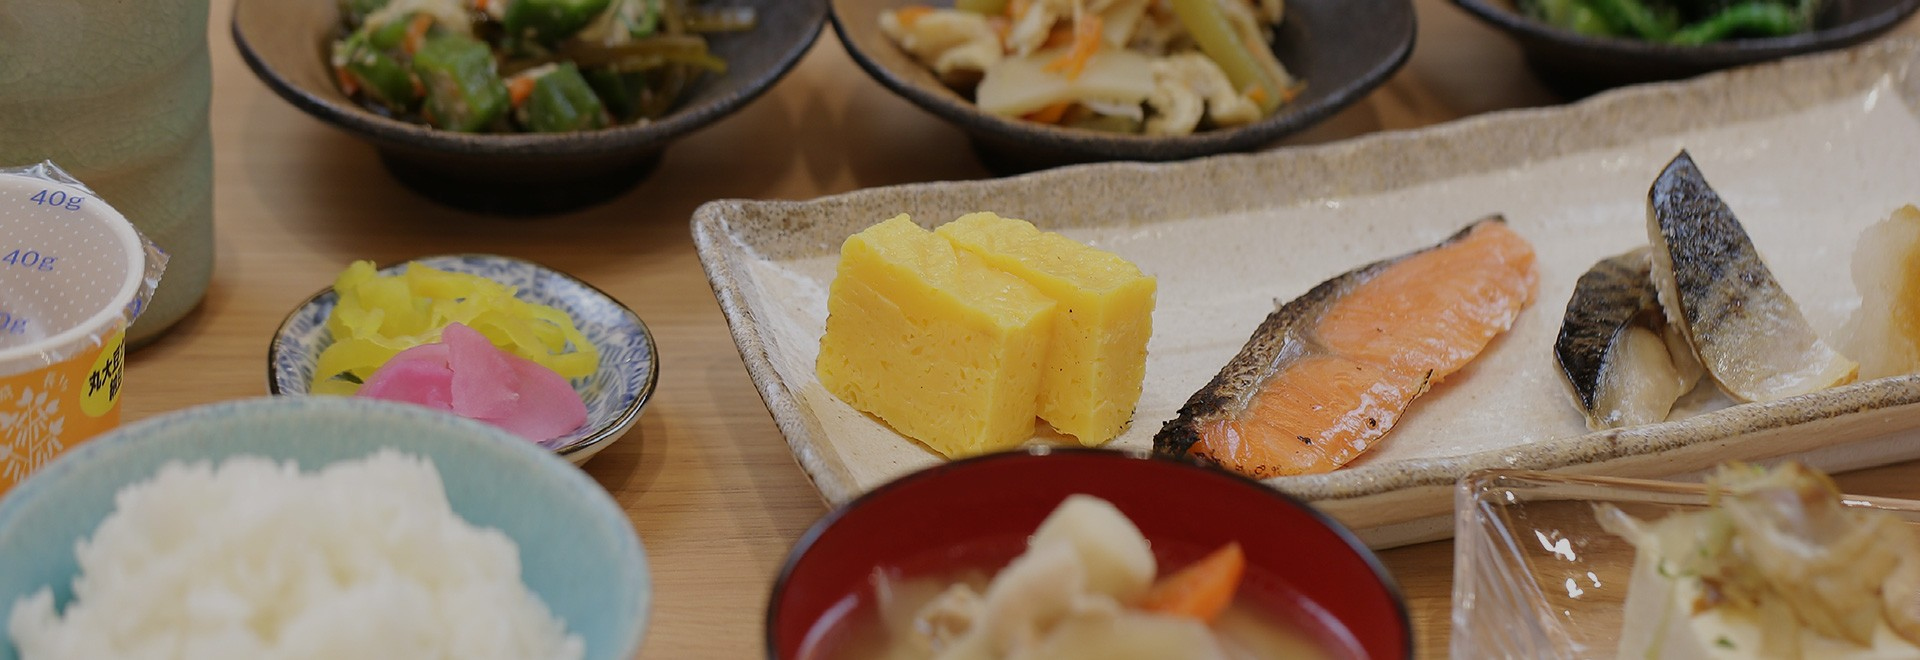 At the beginning of a wonderful day, enjoy our breakfast that is centered on our specialty Japanese side dishes.